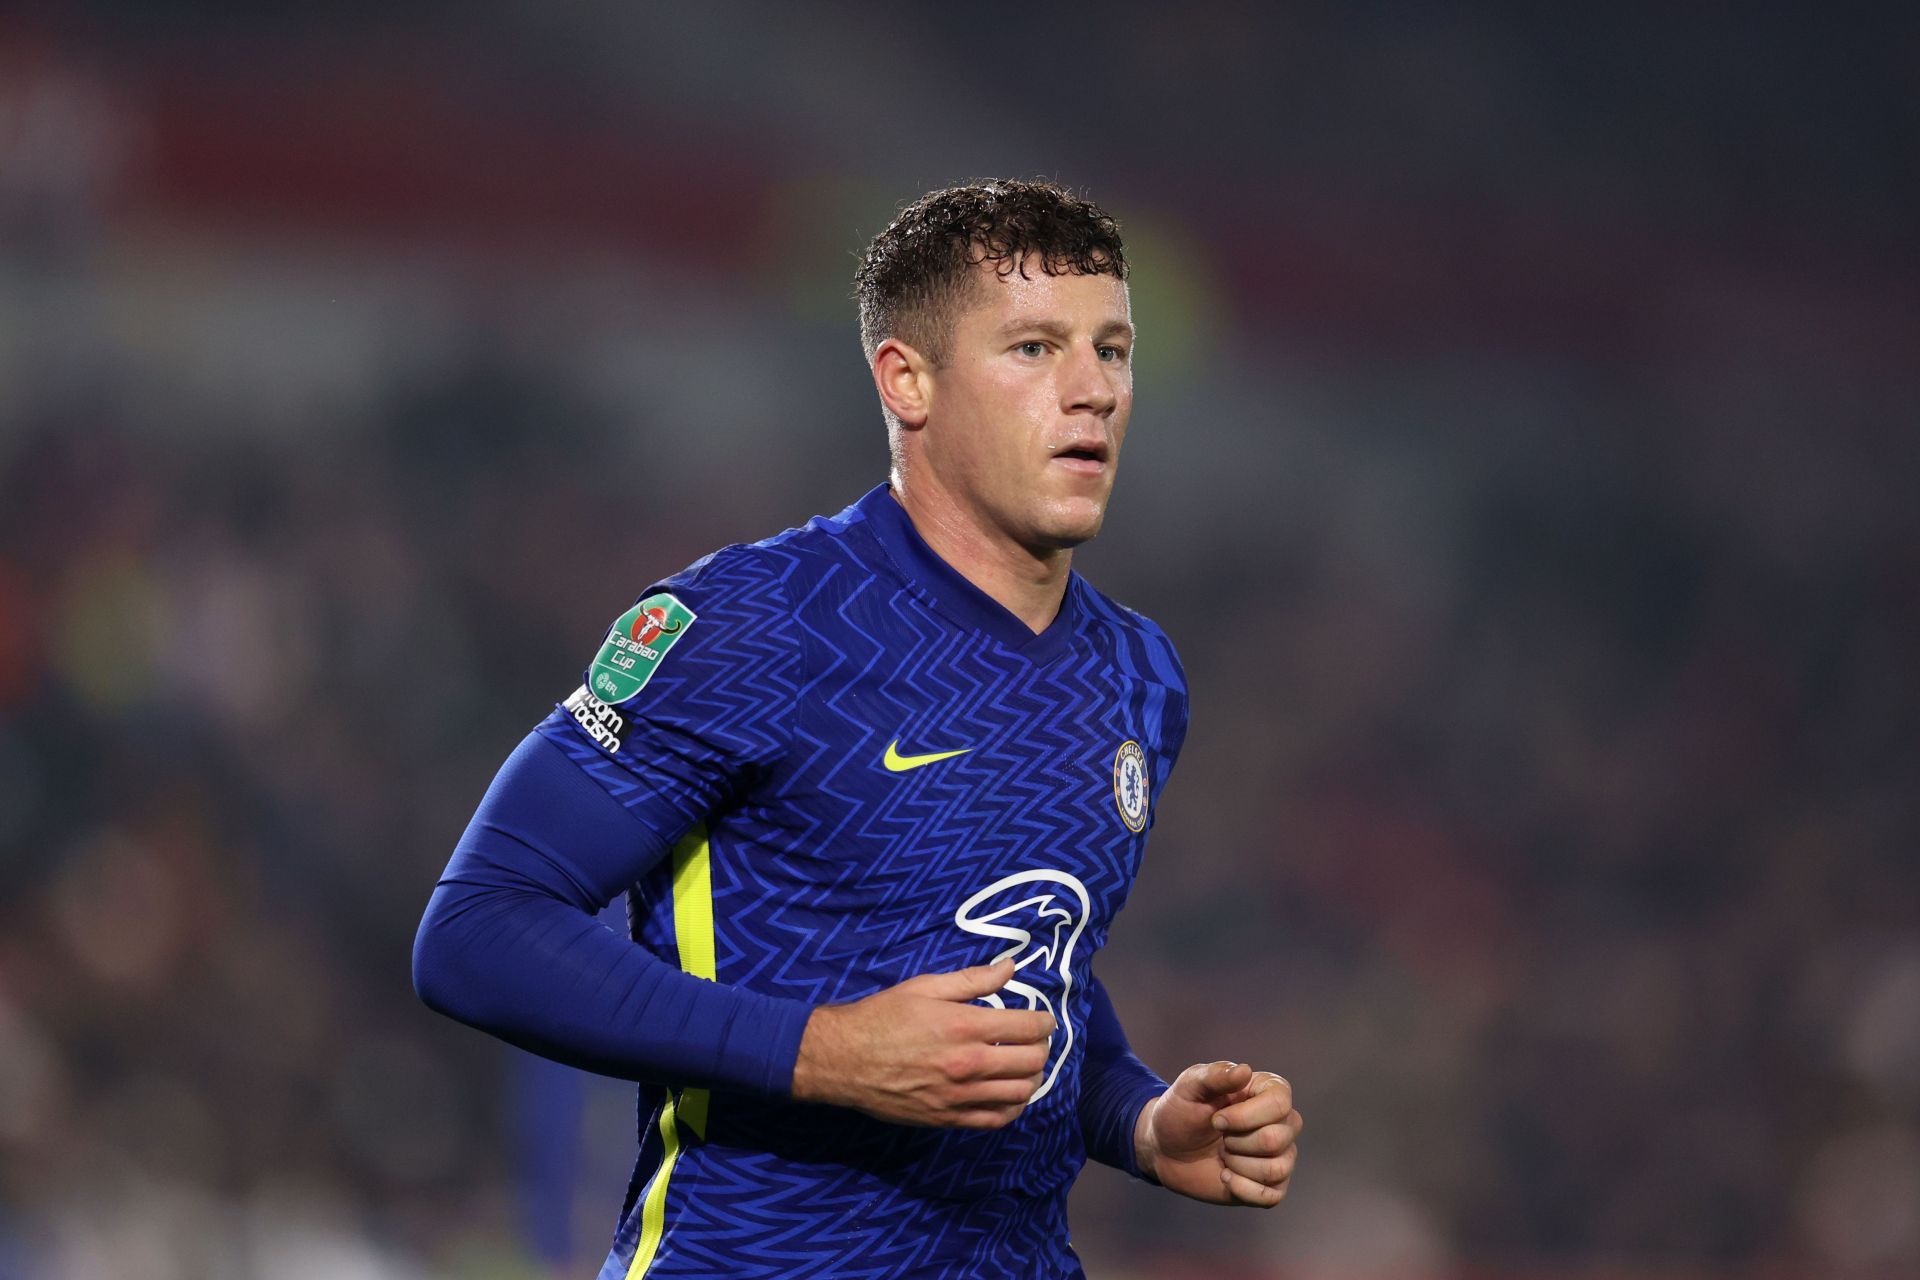 Everton are planning a loan move for Chelsea outcast Ross Barkley.